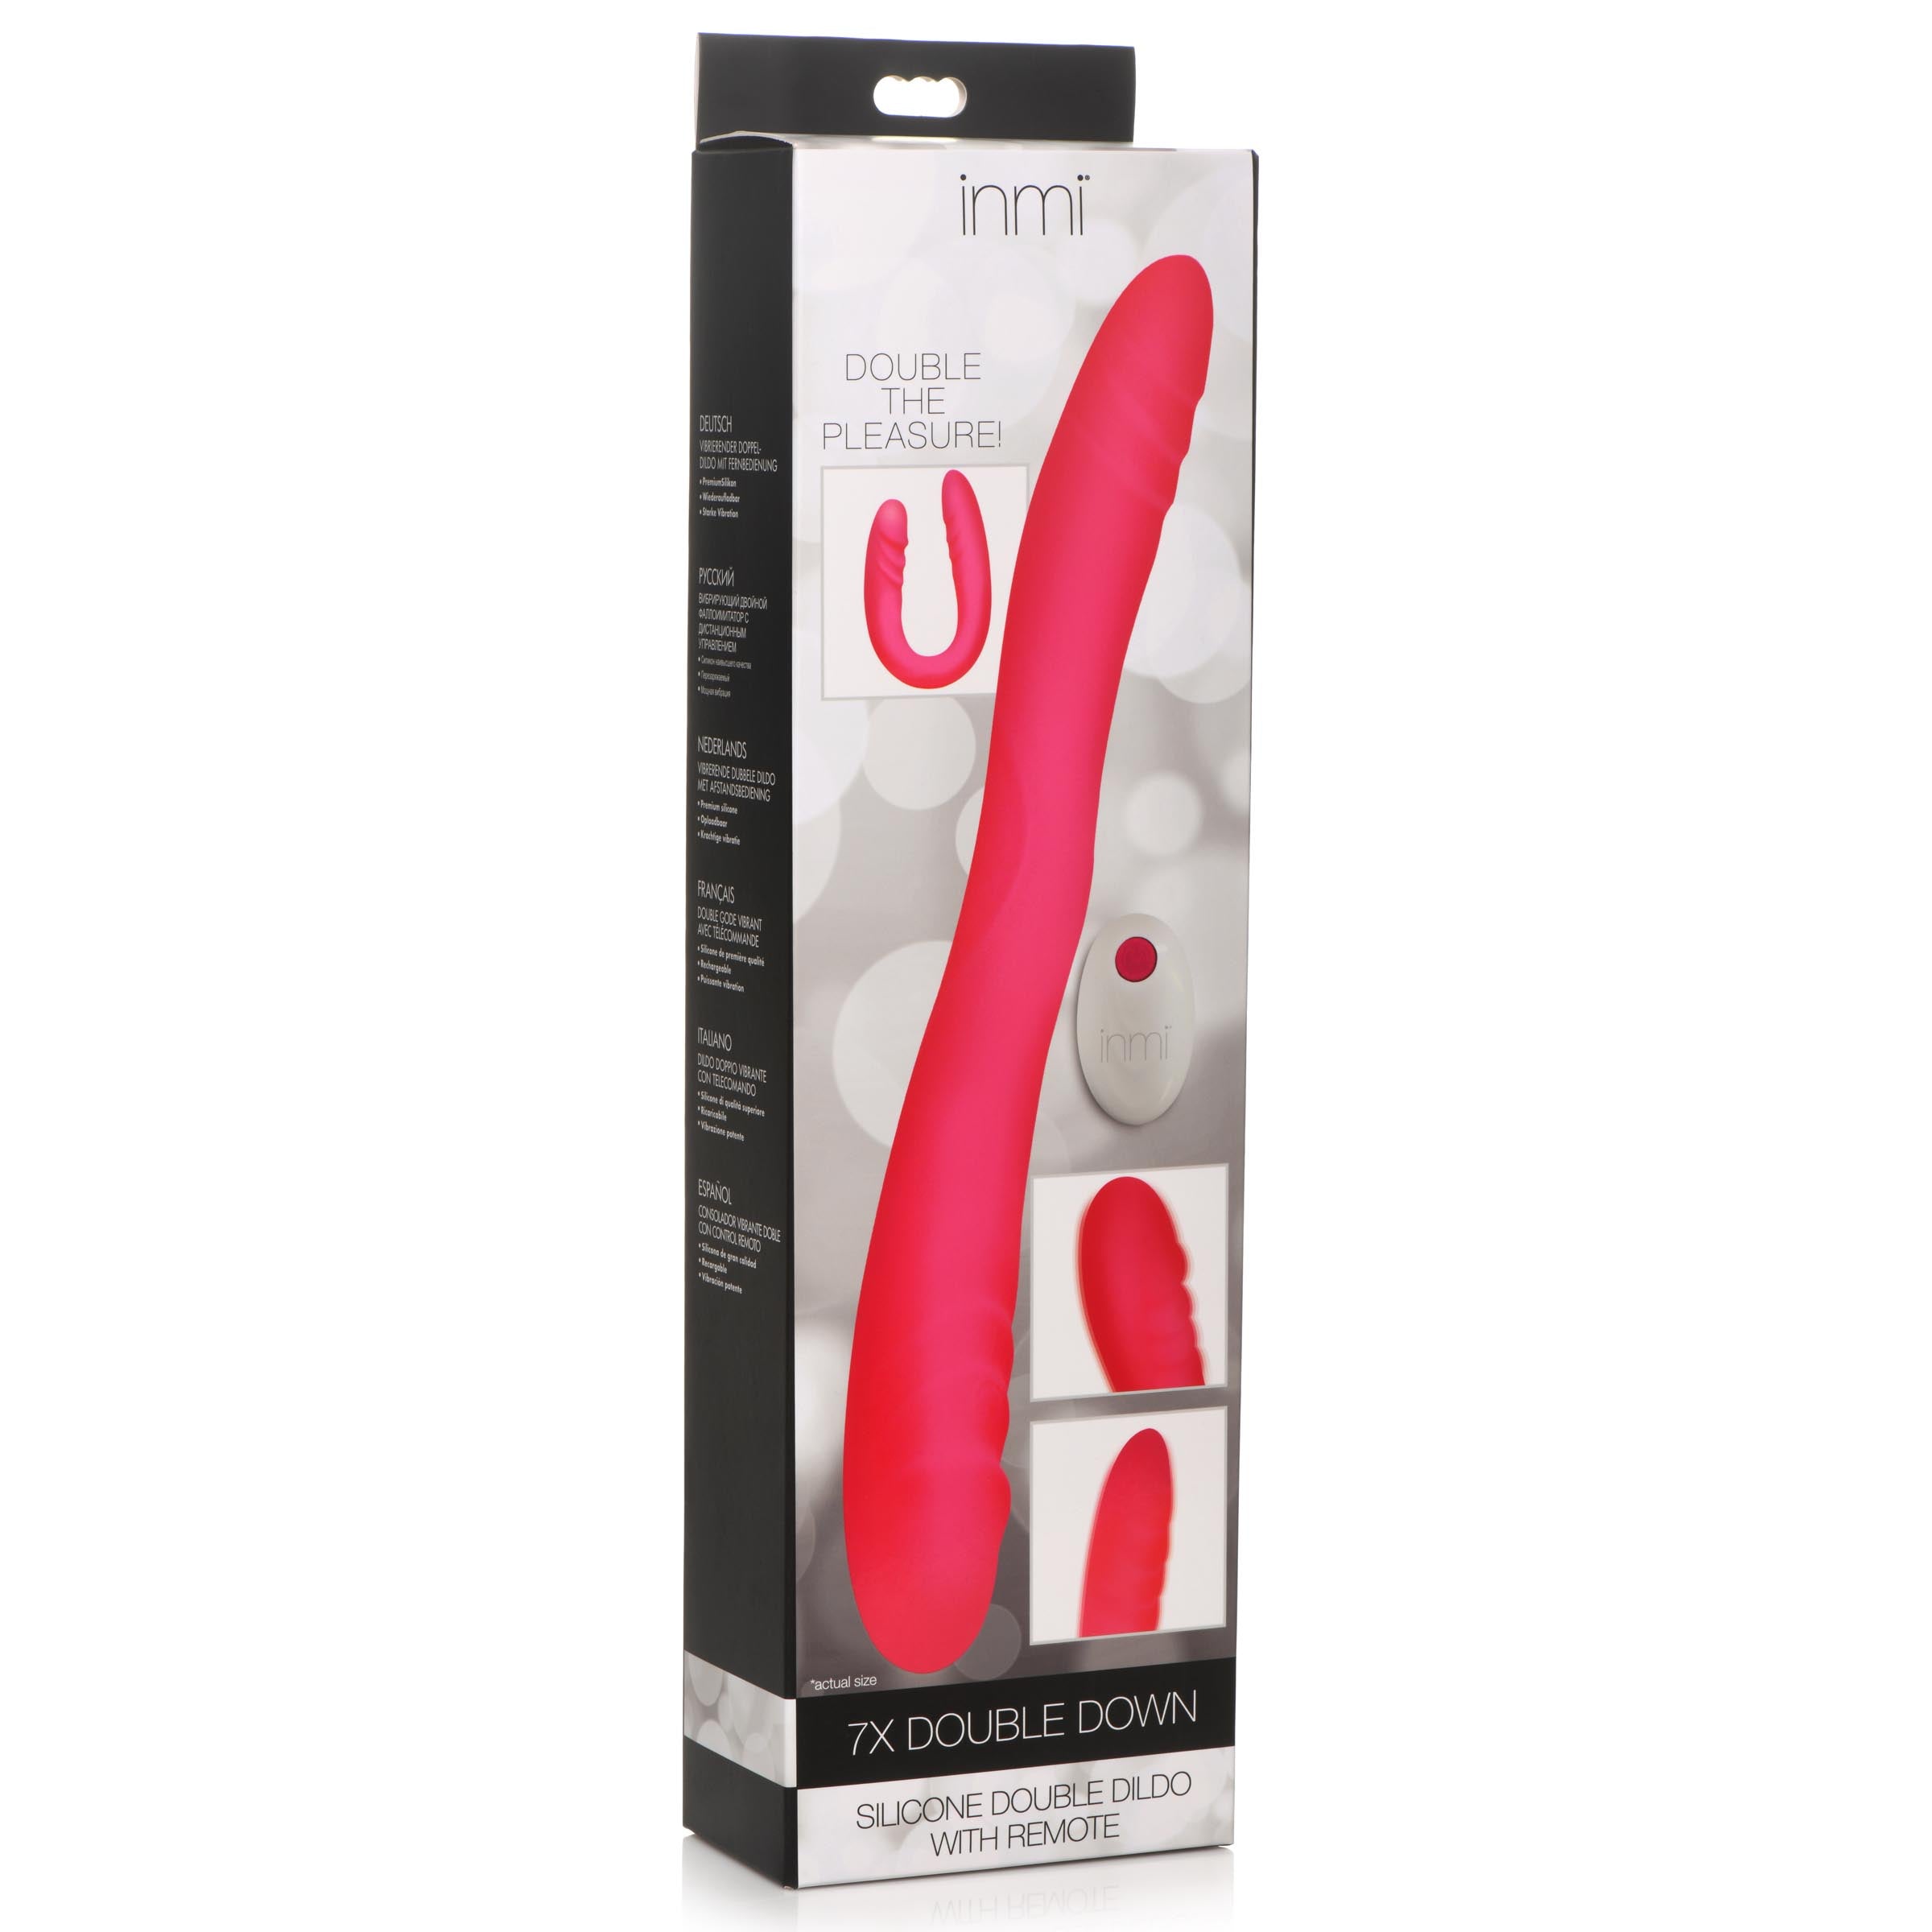 7X Double Down Silicone Double Dildo with Remote